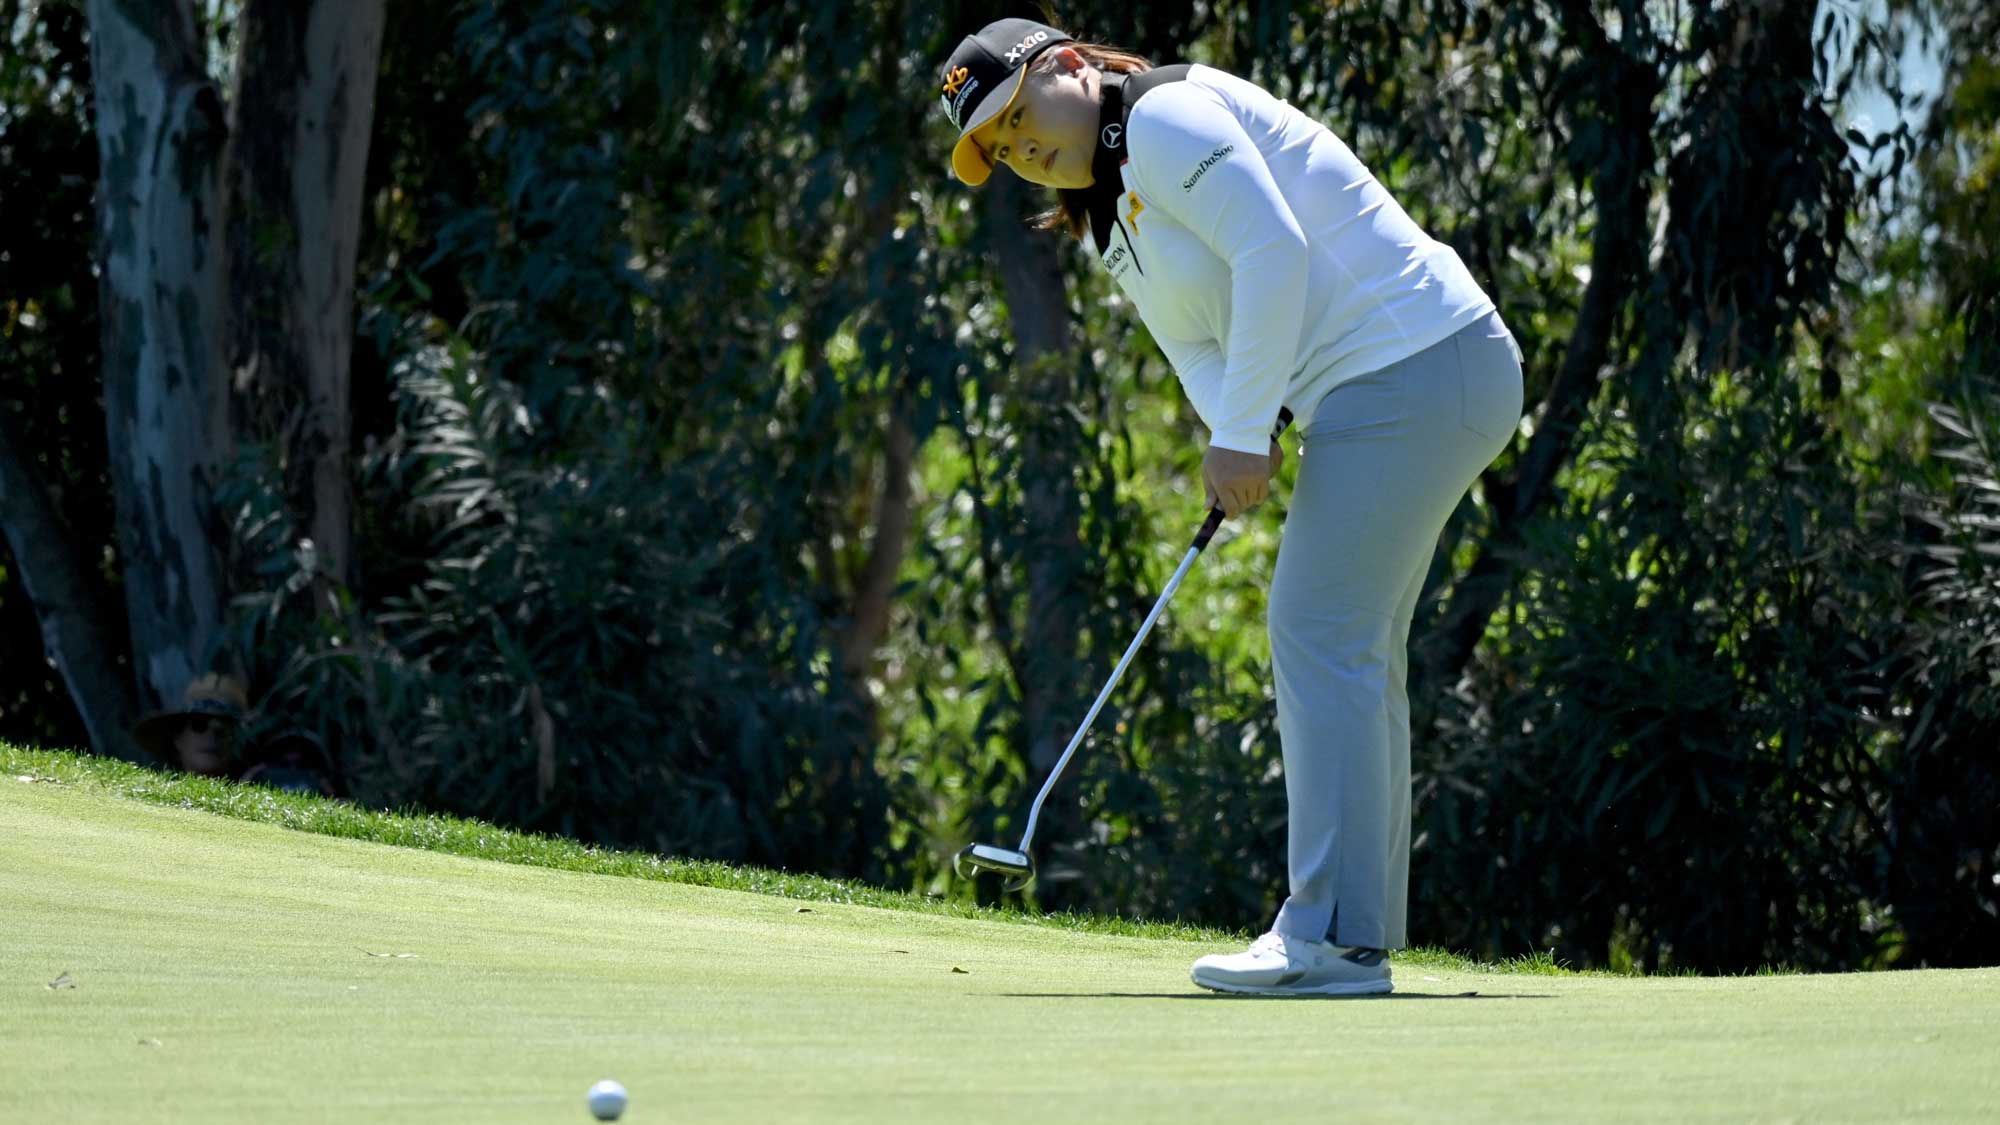 Inbee Park of South Korea putts on the 1st green during the Final Round of the KIA Classic at the Aviara Golf Club on March 28, 2021 in Carlsbad, California.